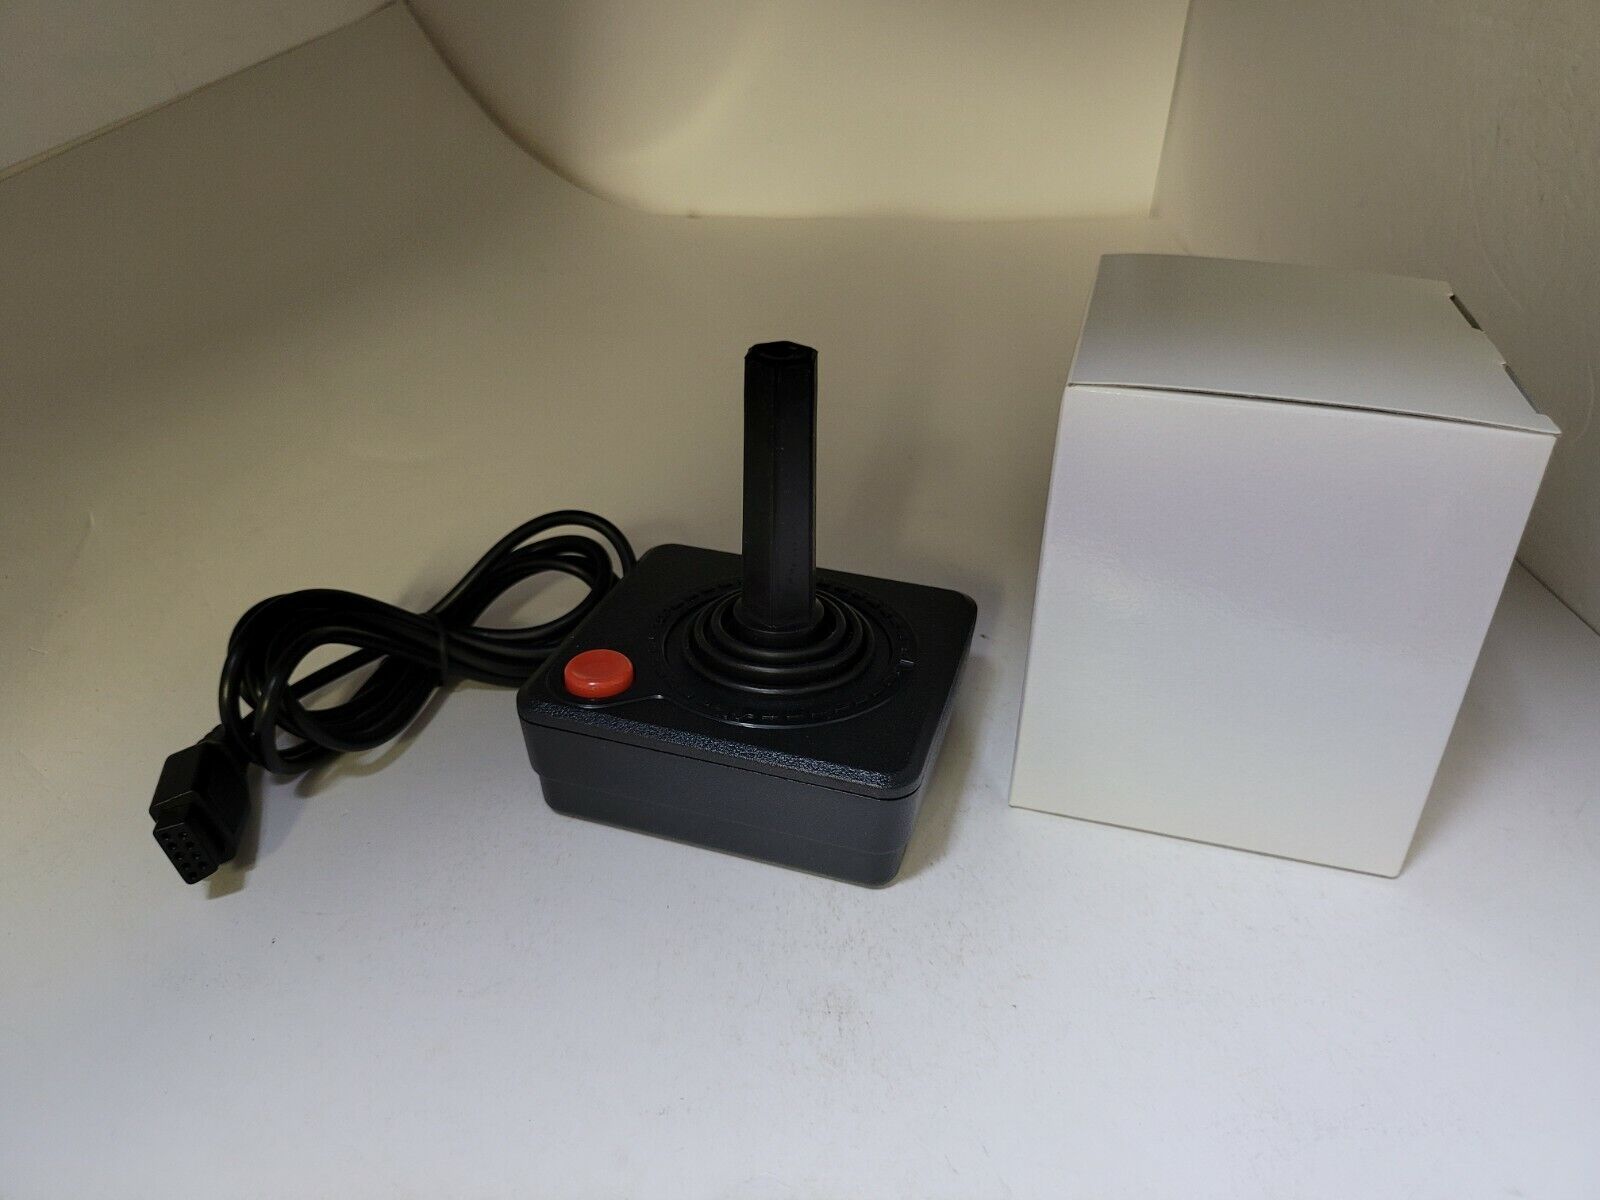 NEW JOYSTICK CONTROLLER FOR COMMODORE  64  RED BUTTON ORIGINAL STYLE  #11A